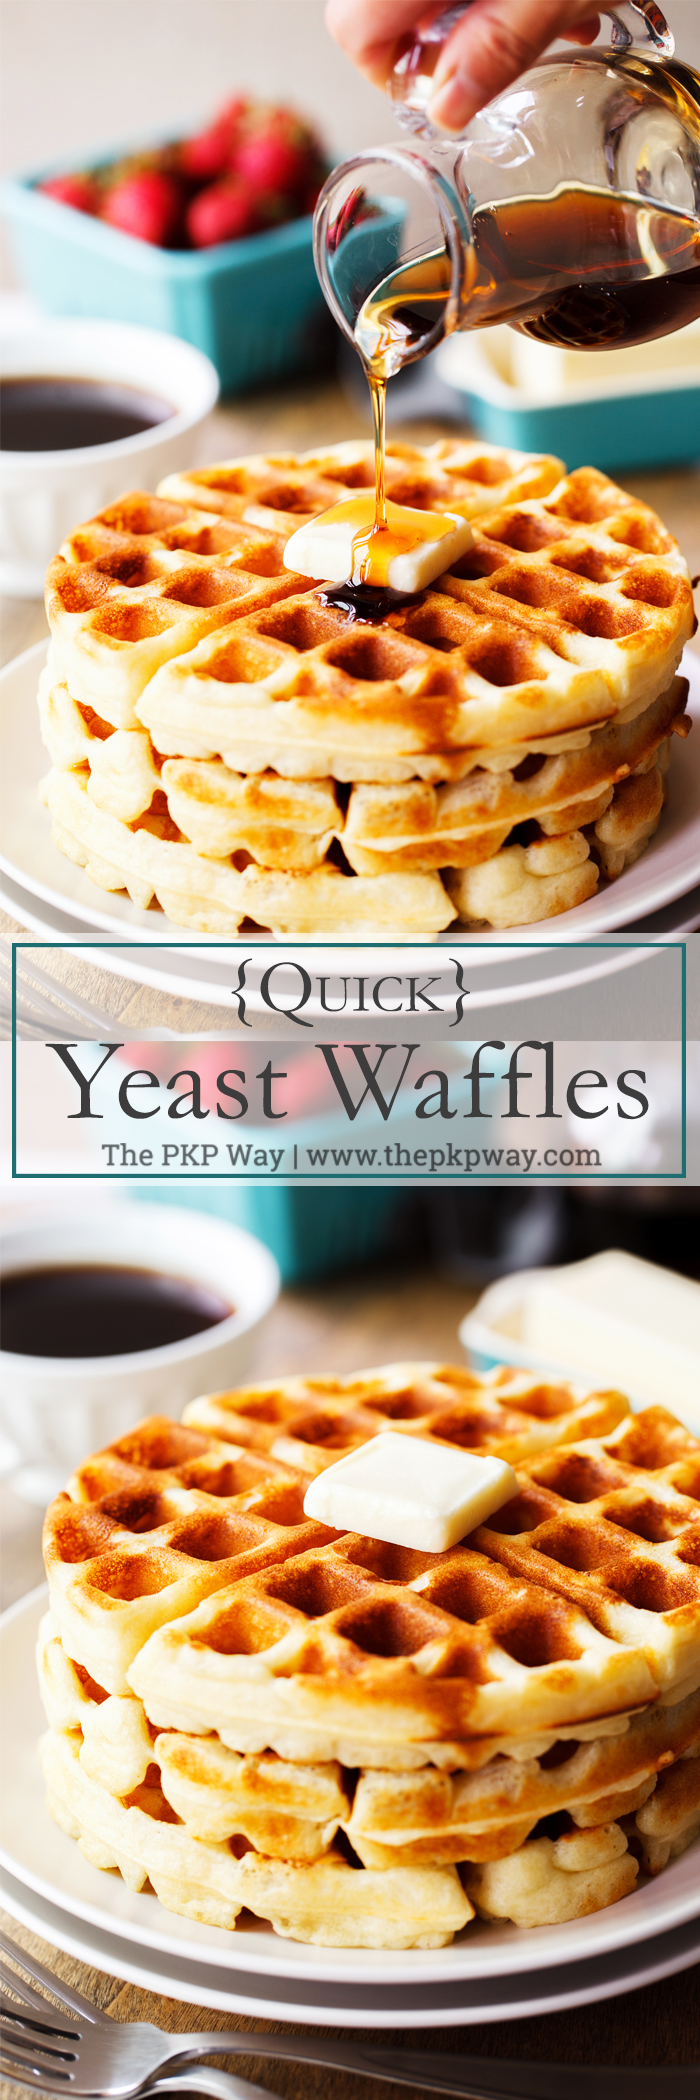 Ready in 90 minutes and your new go-to recipe, these Quick Yeast Waffles are crispy, airy, tender, tangy, and have just a hint of sweetness.